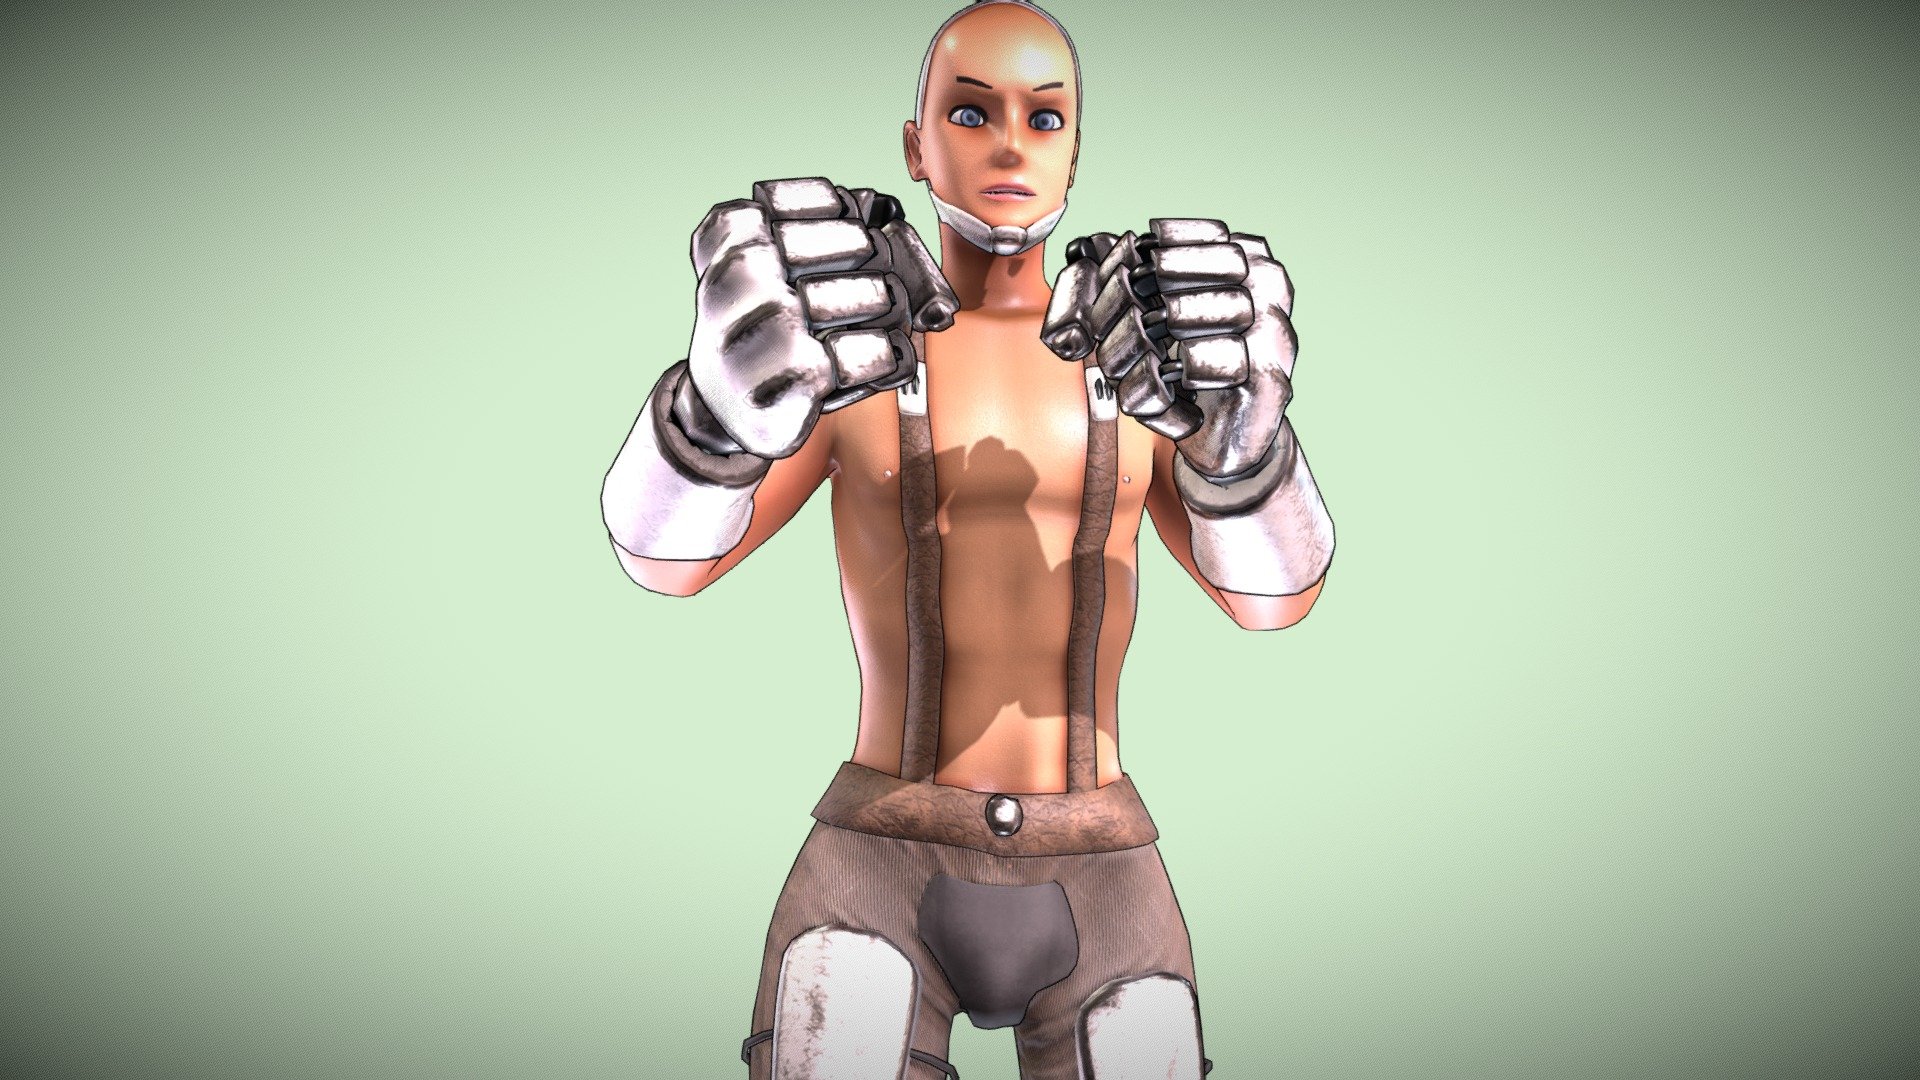 Big Fist

Heavy Fist Character.
Body &amp; Face Rigged.
UV Unwrapped and textured. 
Comes with textures at 2k &amp; 4k resolution. 
Contains PBR &amp; Toon (LBS) variations.

The model contains 19 objects, 5 sets of material (+1 Outline for Toon), and 1 set of textures. 
Modeled in Blender, painted in Substance Painter. 
.
.
.
.
.
More: https://linktr.ee/ed3d - Heavy Fist Character - Buy Royalty Free 3D model by Ed (@Ed3D.Blend) 3d model